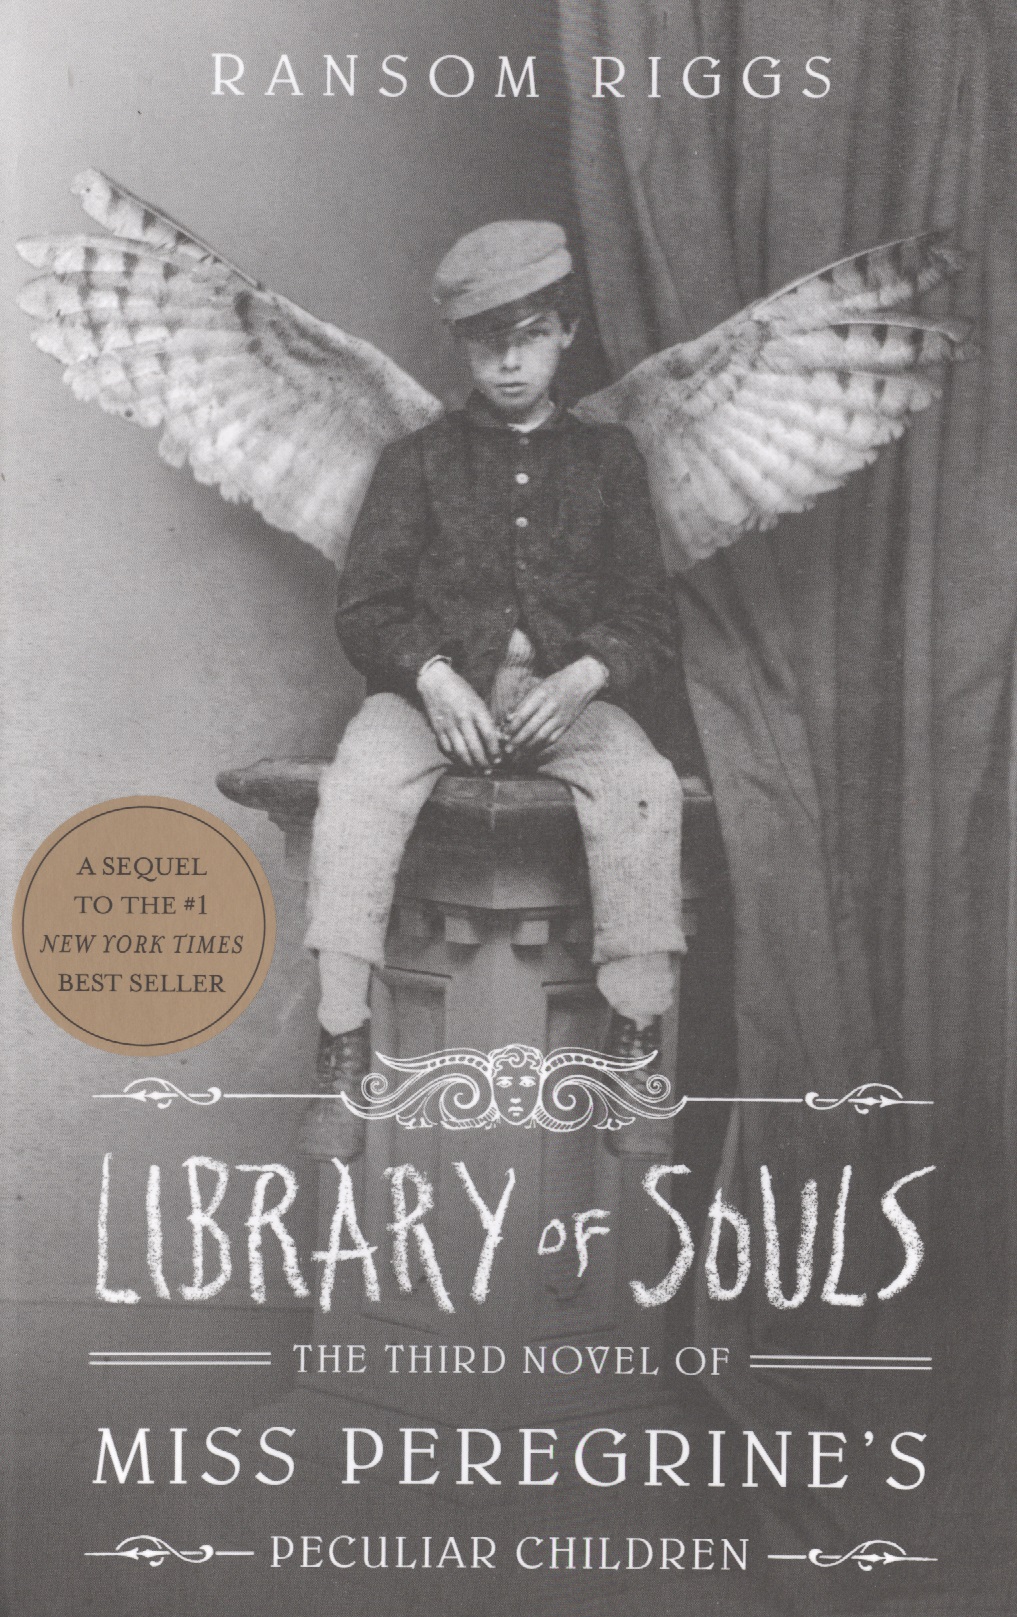 Riggs Ralph M. Library of Souls riggs ransom tales of the peculiar peculiar children